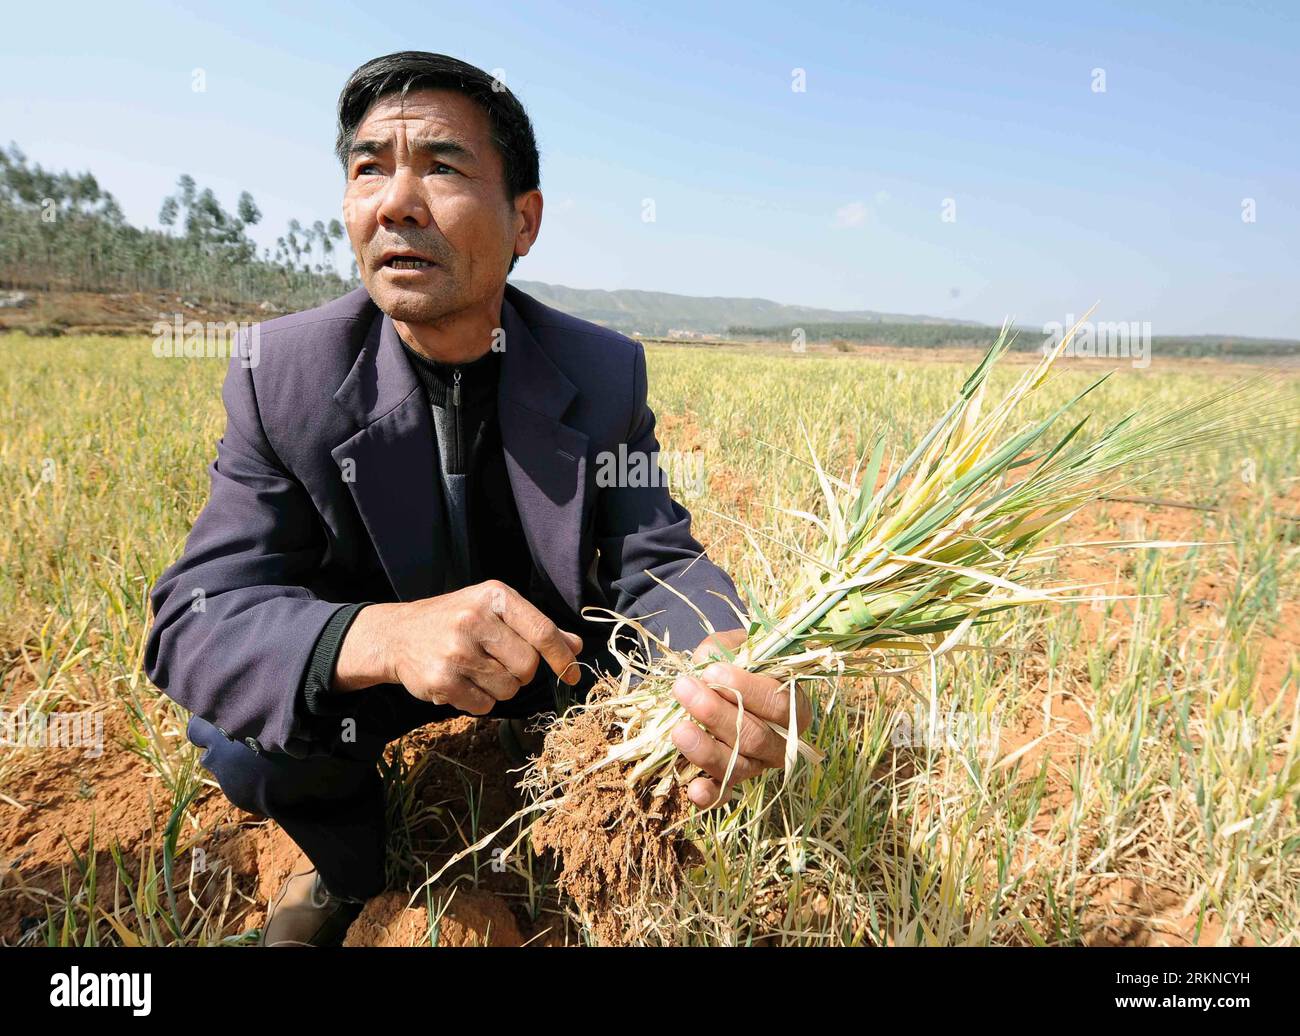 Bildnummer: 57088318  Datum: 17.02.2012  Copyright: imago/Xinhua (120219) -- QUJING, Feb. 19, 2012 (Xinhua) -- Wang Desheng, a local farmer, shows the dried-up wheat at Xiaoji Village of Luliang County in Qujing City, southwest China s Yunnan Province, Feb. 17, 2012. According to latest figures from provincial civil affairs authorities, about 6.31 million in 91 counties in the province have been affected by the drought as of Feb. 16. The drought has left more than 2.42 million and 1.55 million livestock short of drinking water.(Xinhua/Yang Zongyou) (ry) CHINA-YUNNAN-DROUGHT (CN) PUBLICATIONxNO Stock Photo